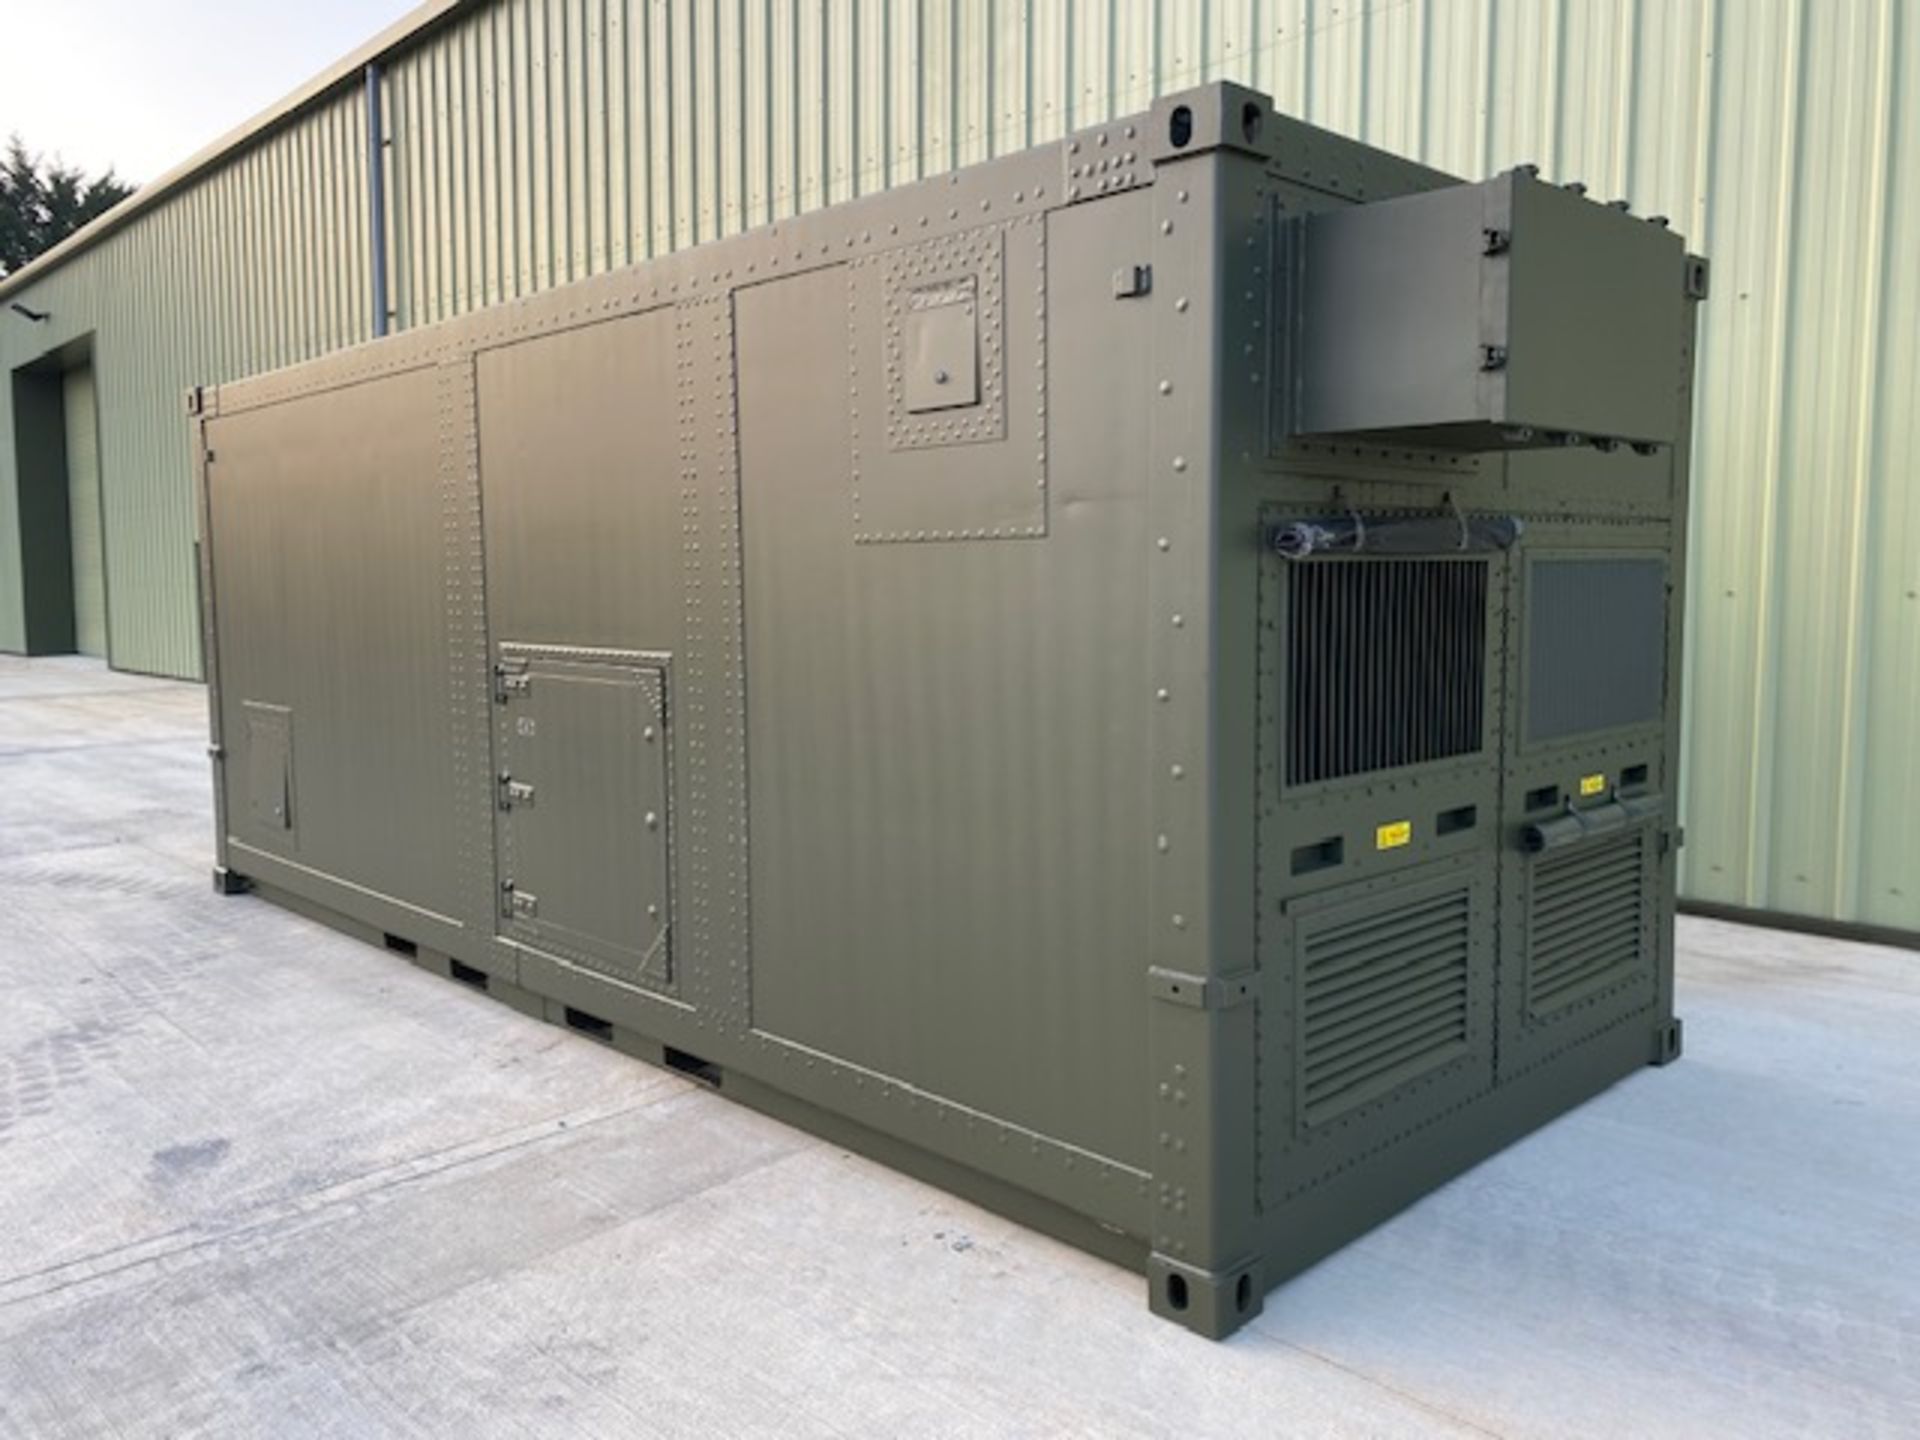 Transportable Lithium-ion Battery Storage & Charging Container From the UK Ministry of Defence - Image 11 of 65